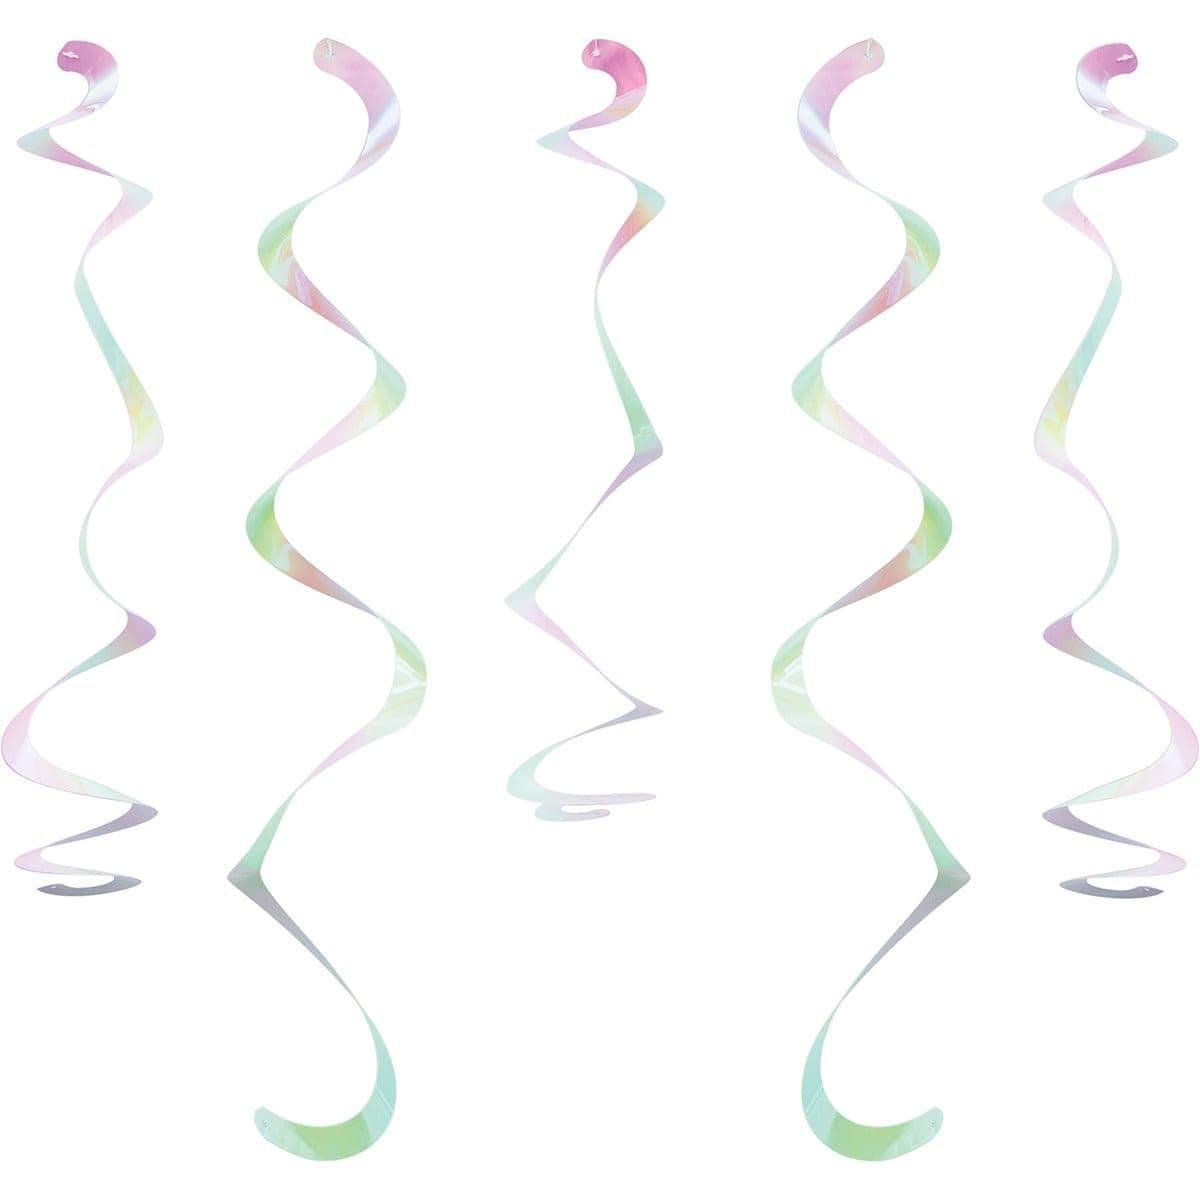 Buy Everyday Entertaining Iridescent Swirl Decorations, 10 per Package sold at Party Expert